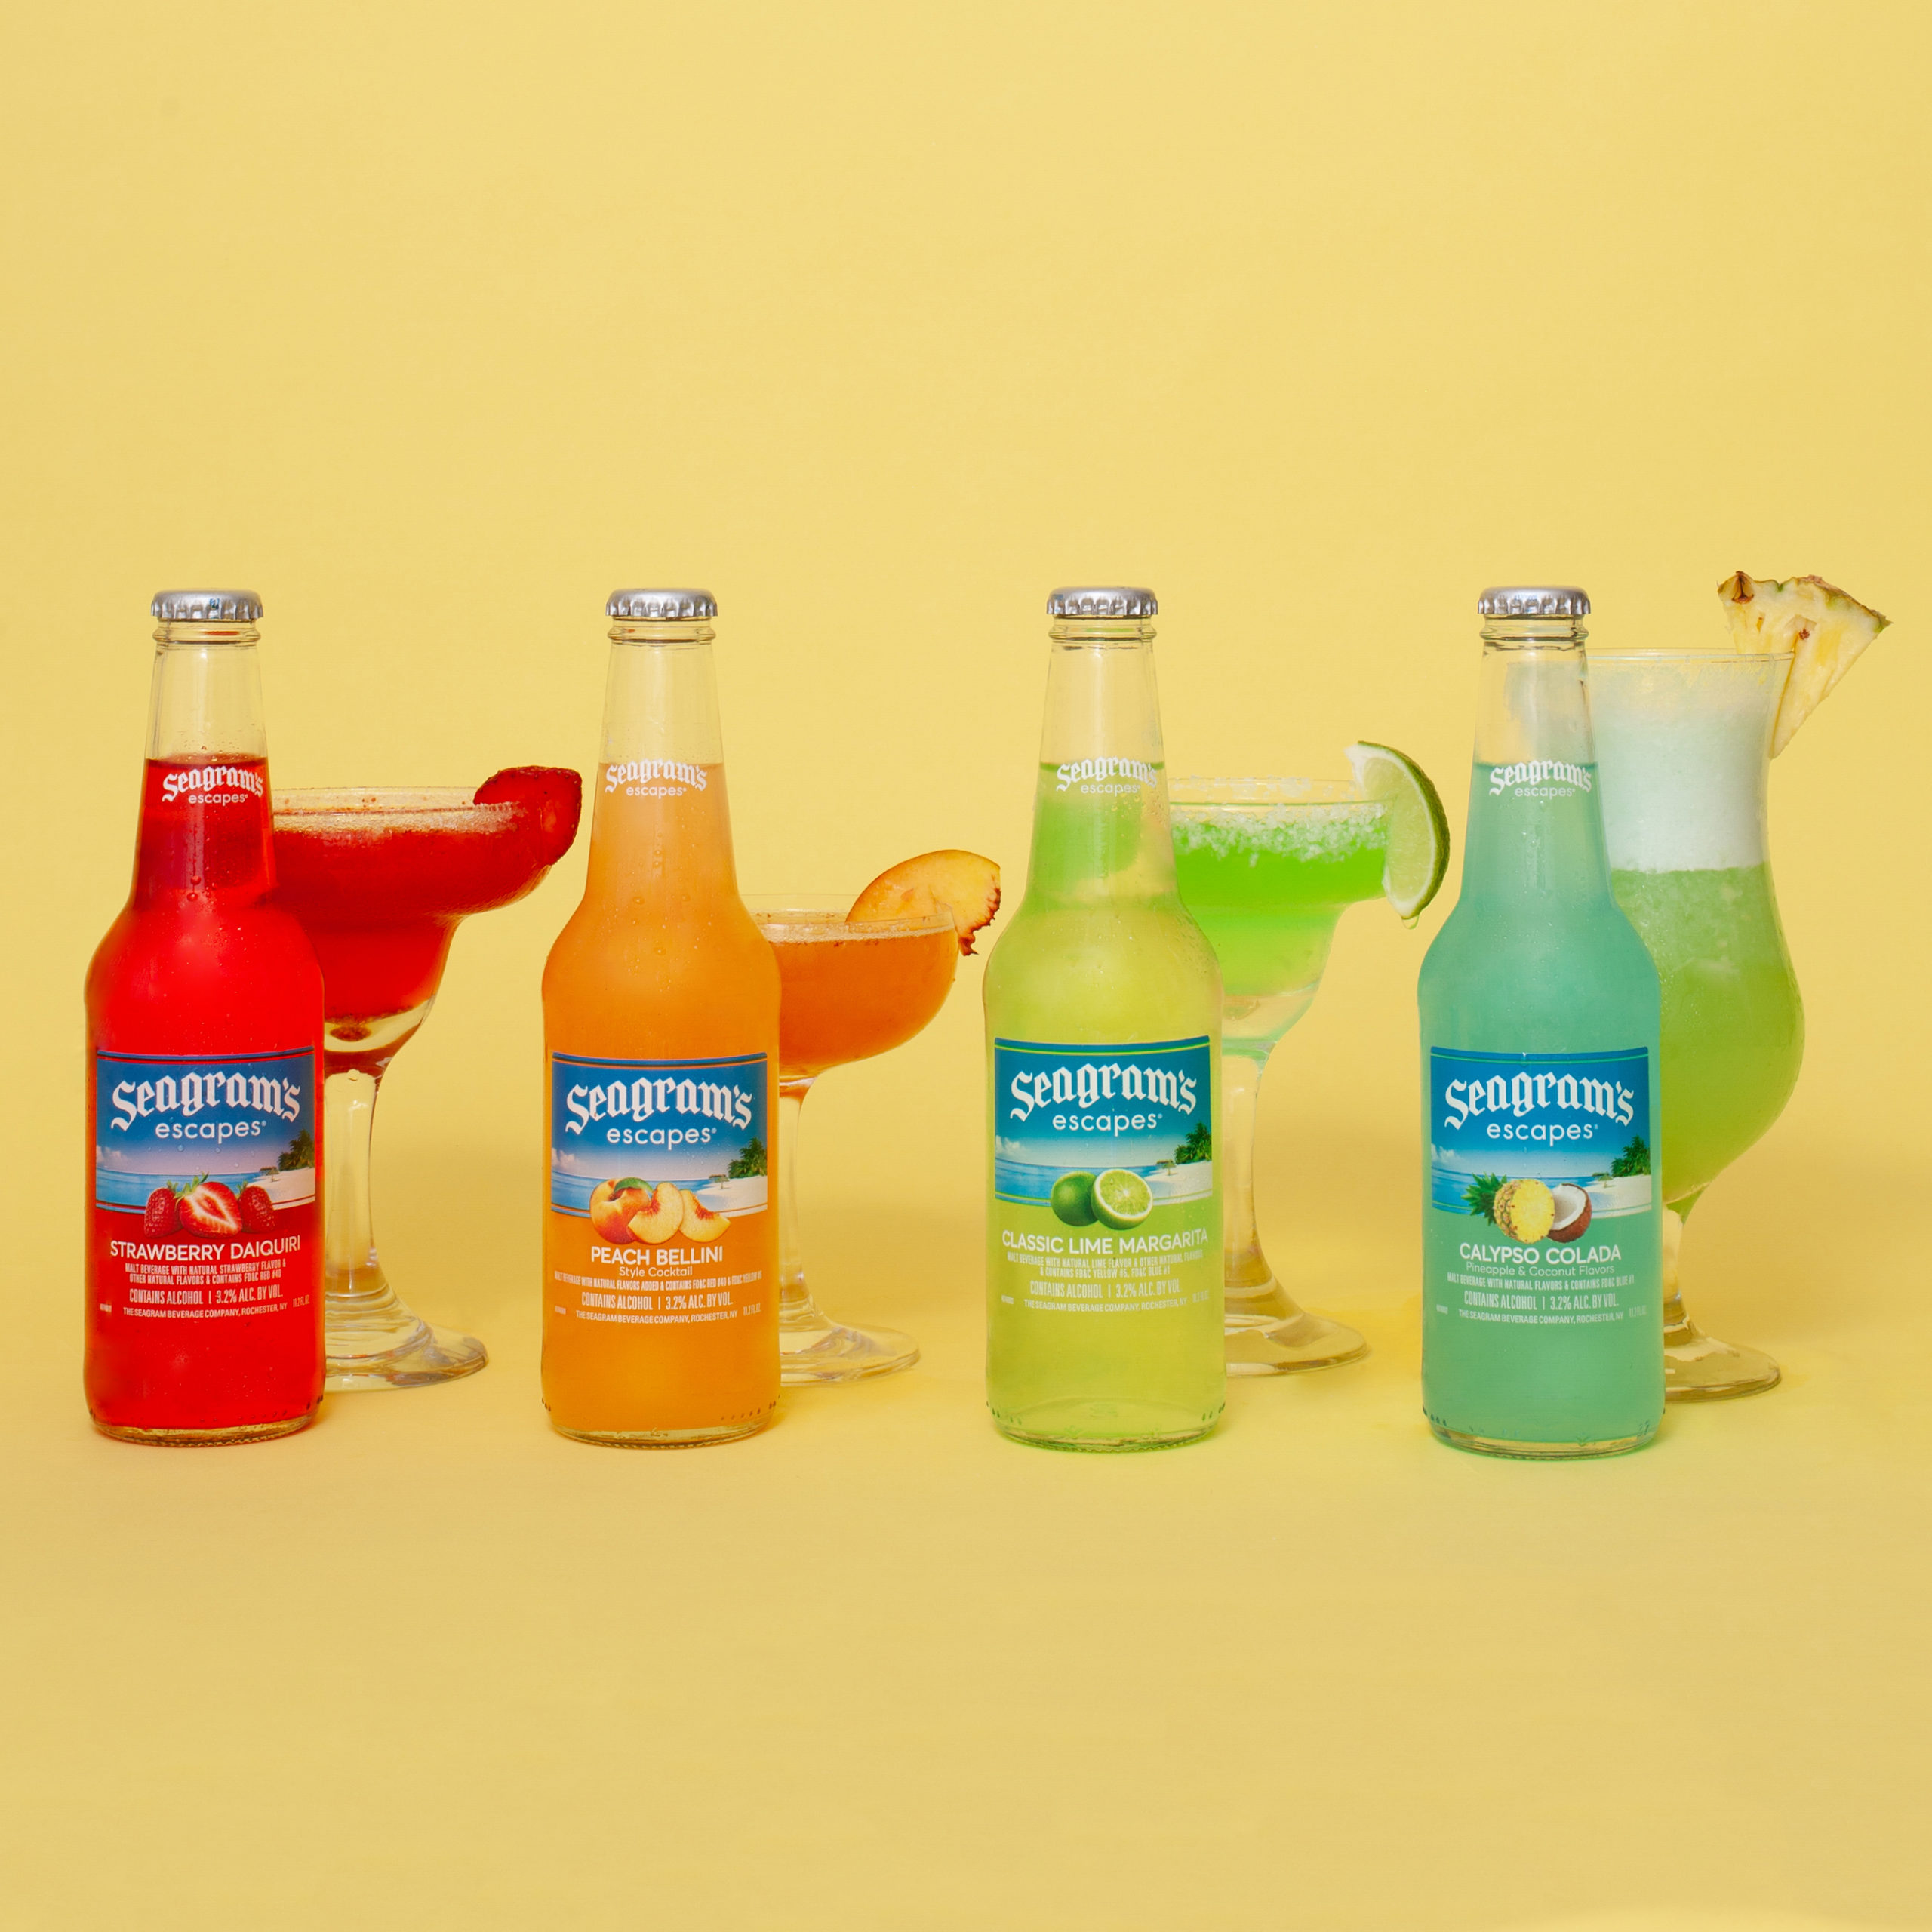 seasgrams escapes marketing campaign - bottles with coordinating beverages behind